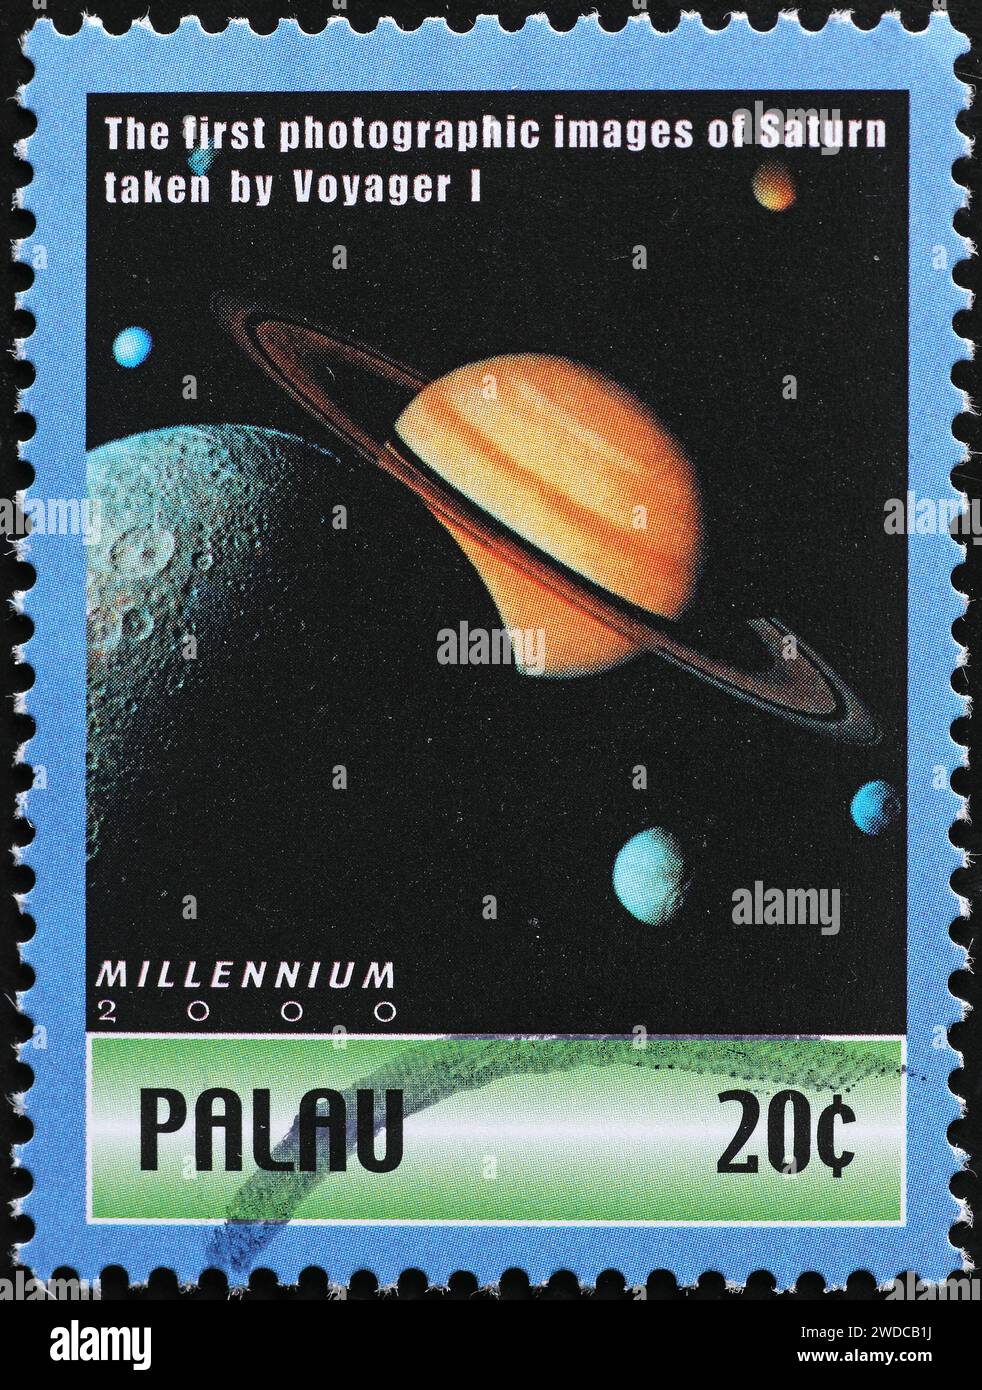 First image of Saturn taken by Voyager I on postage stamp Stock Photo